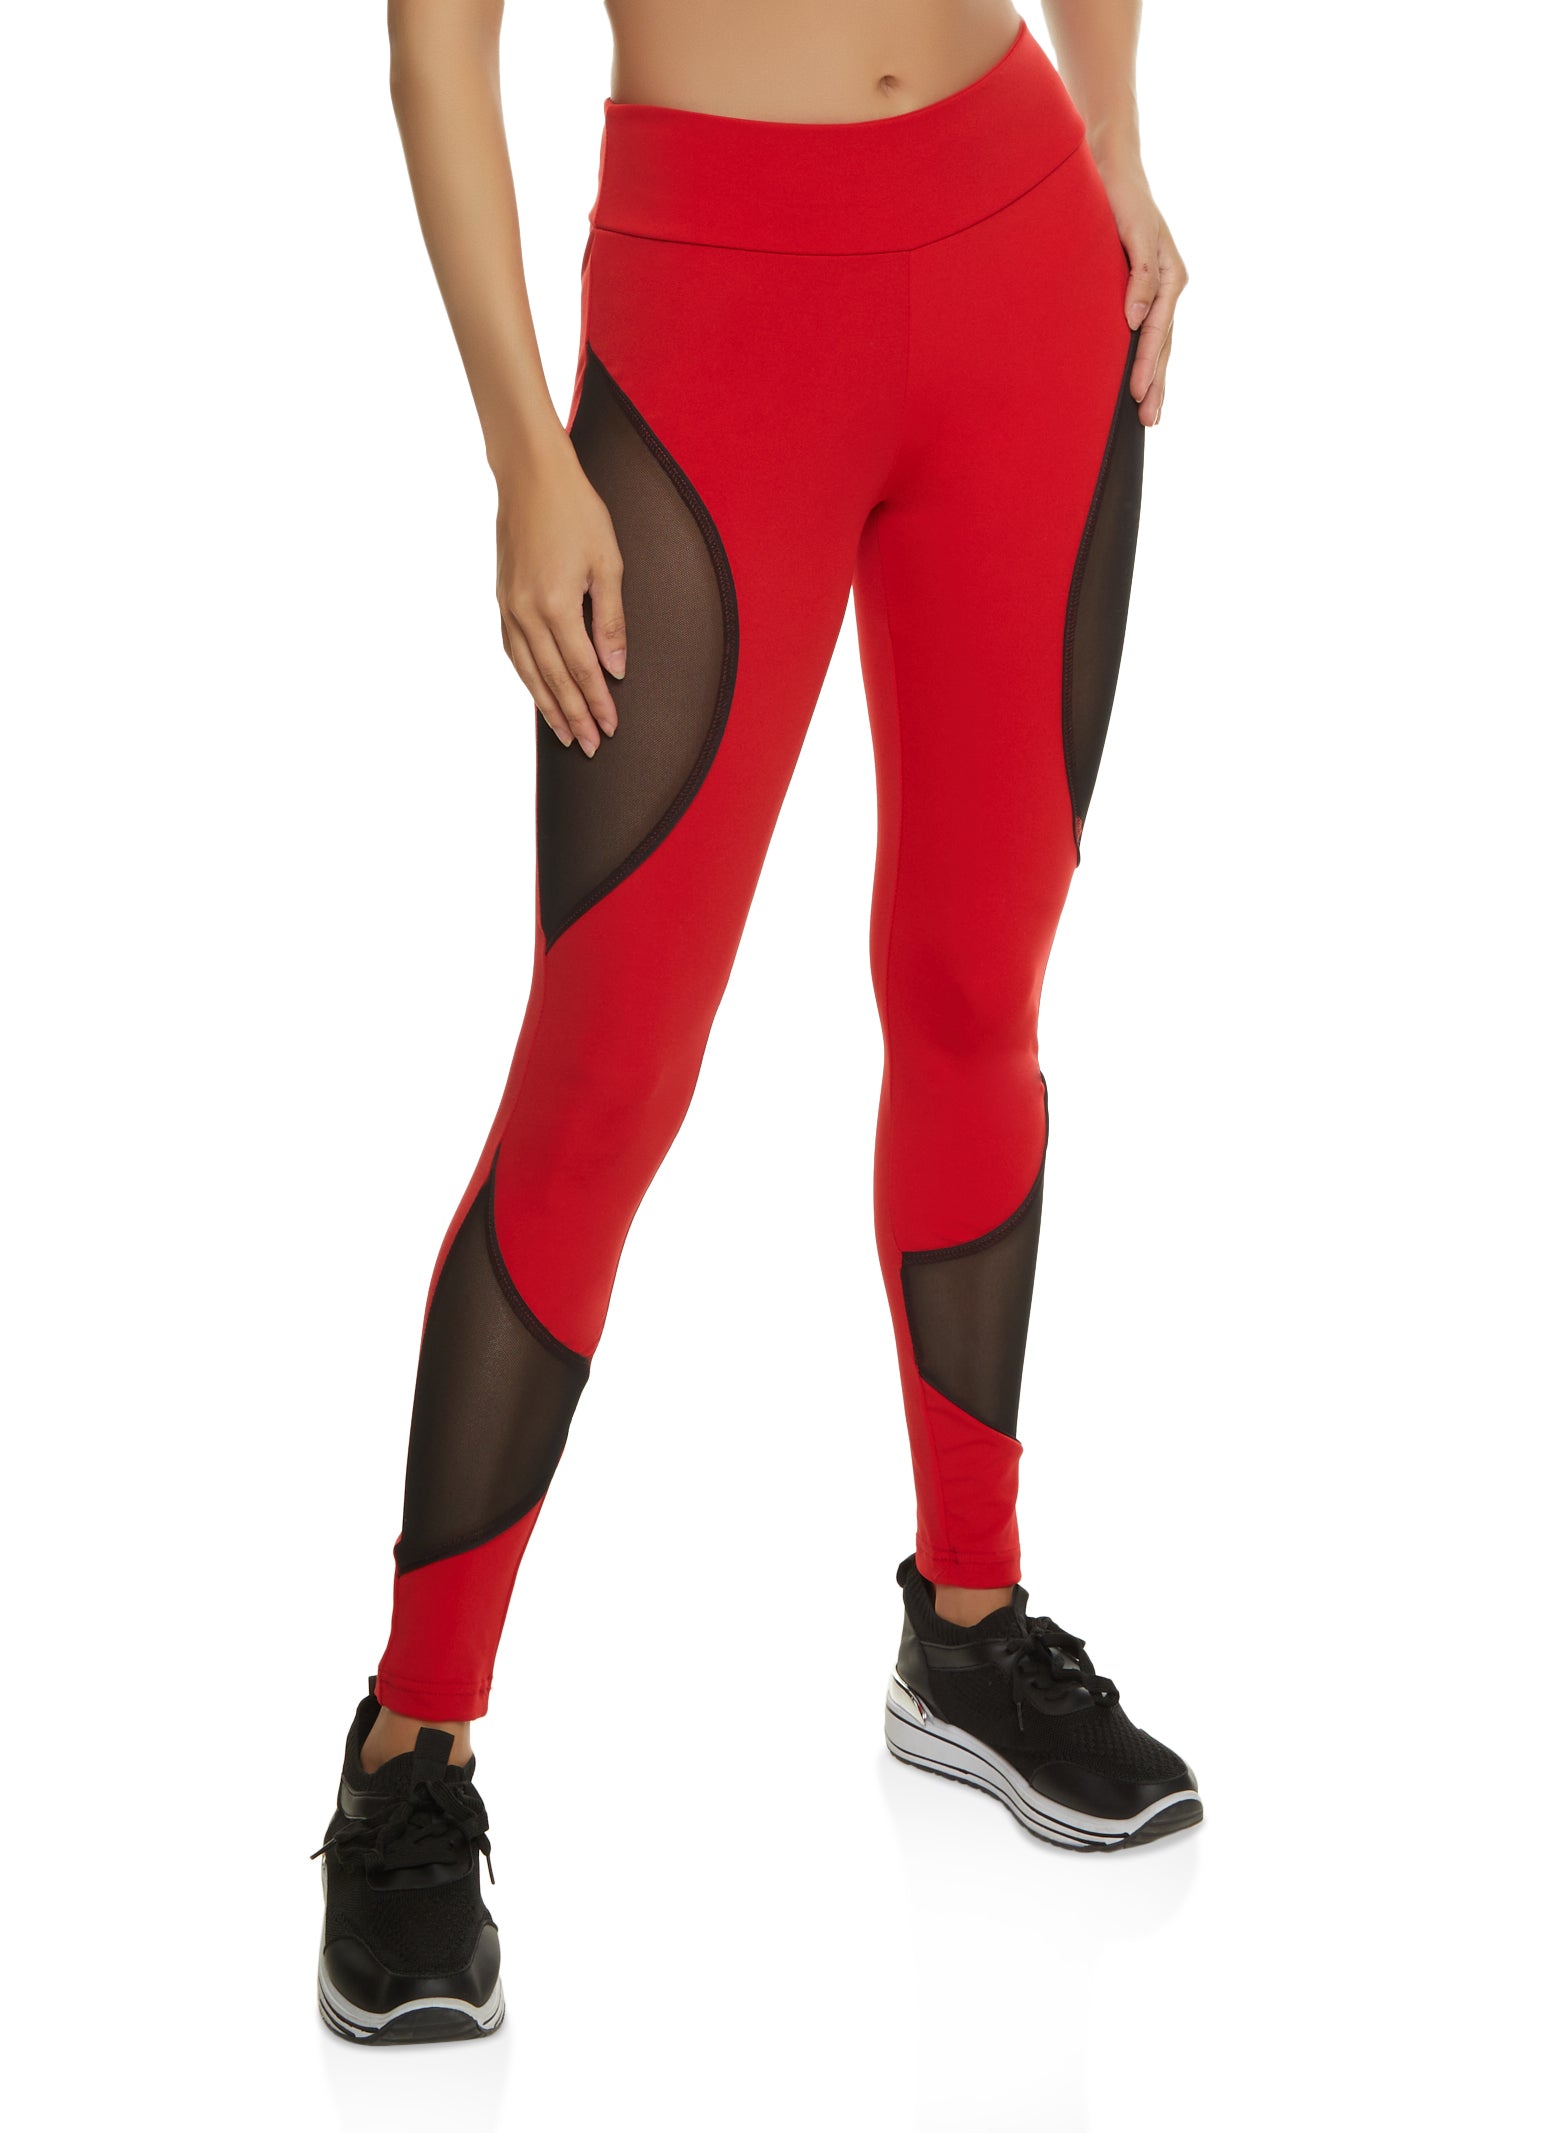 Womens Solid Mesh Workout Leggings with Pockets High Waist Yoga Pants | eBay